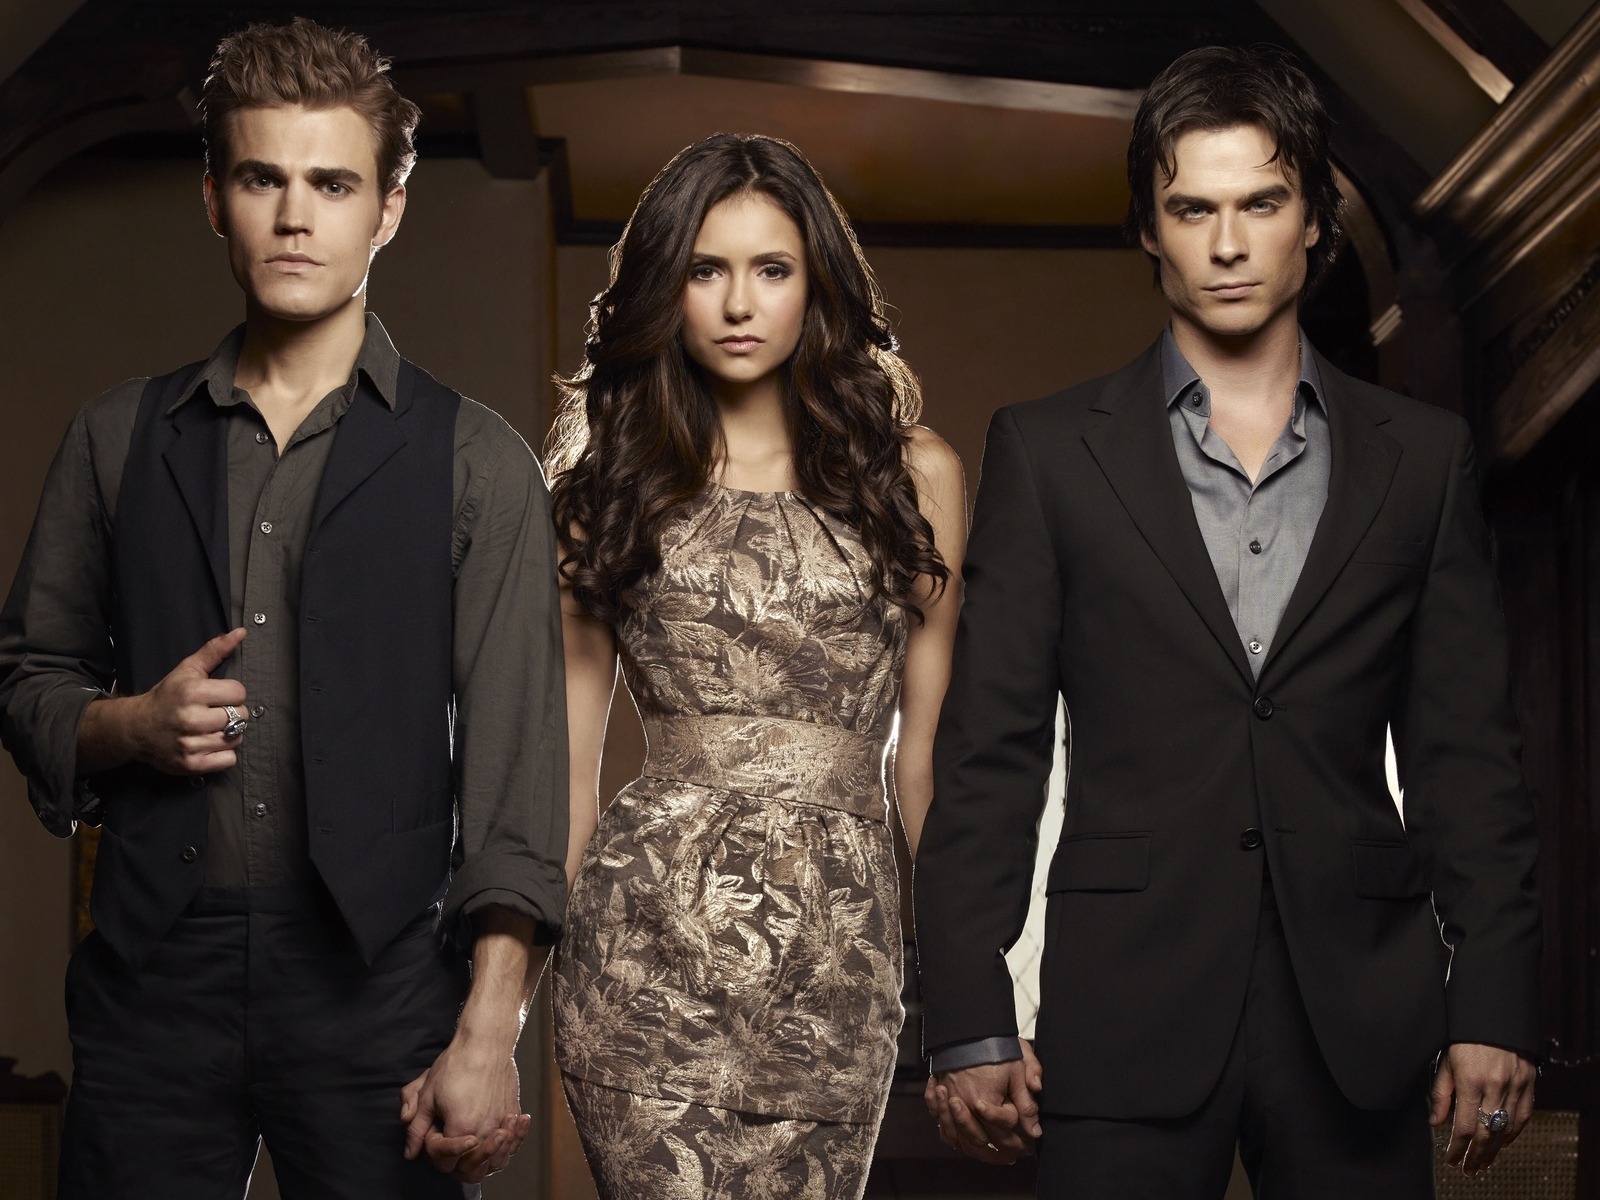 The Vampire Diaries Pics for 1600 x 1200 resolution